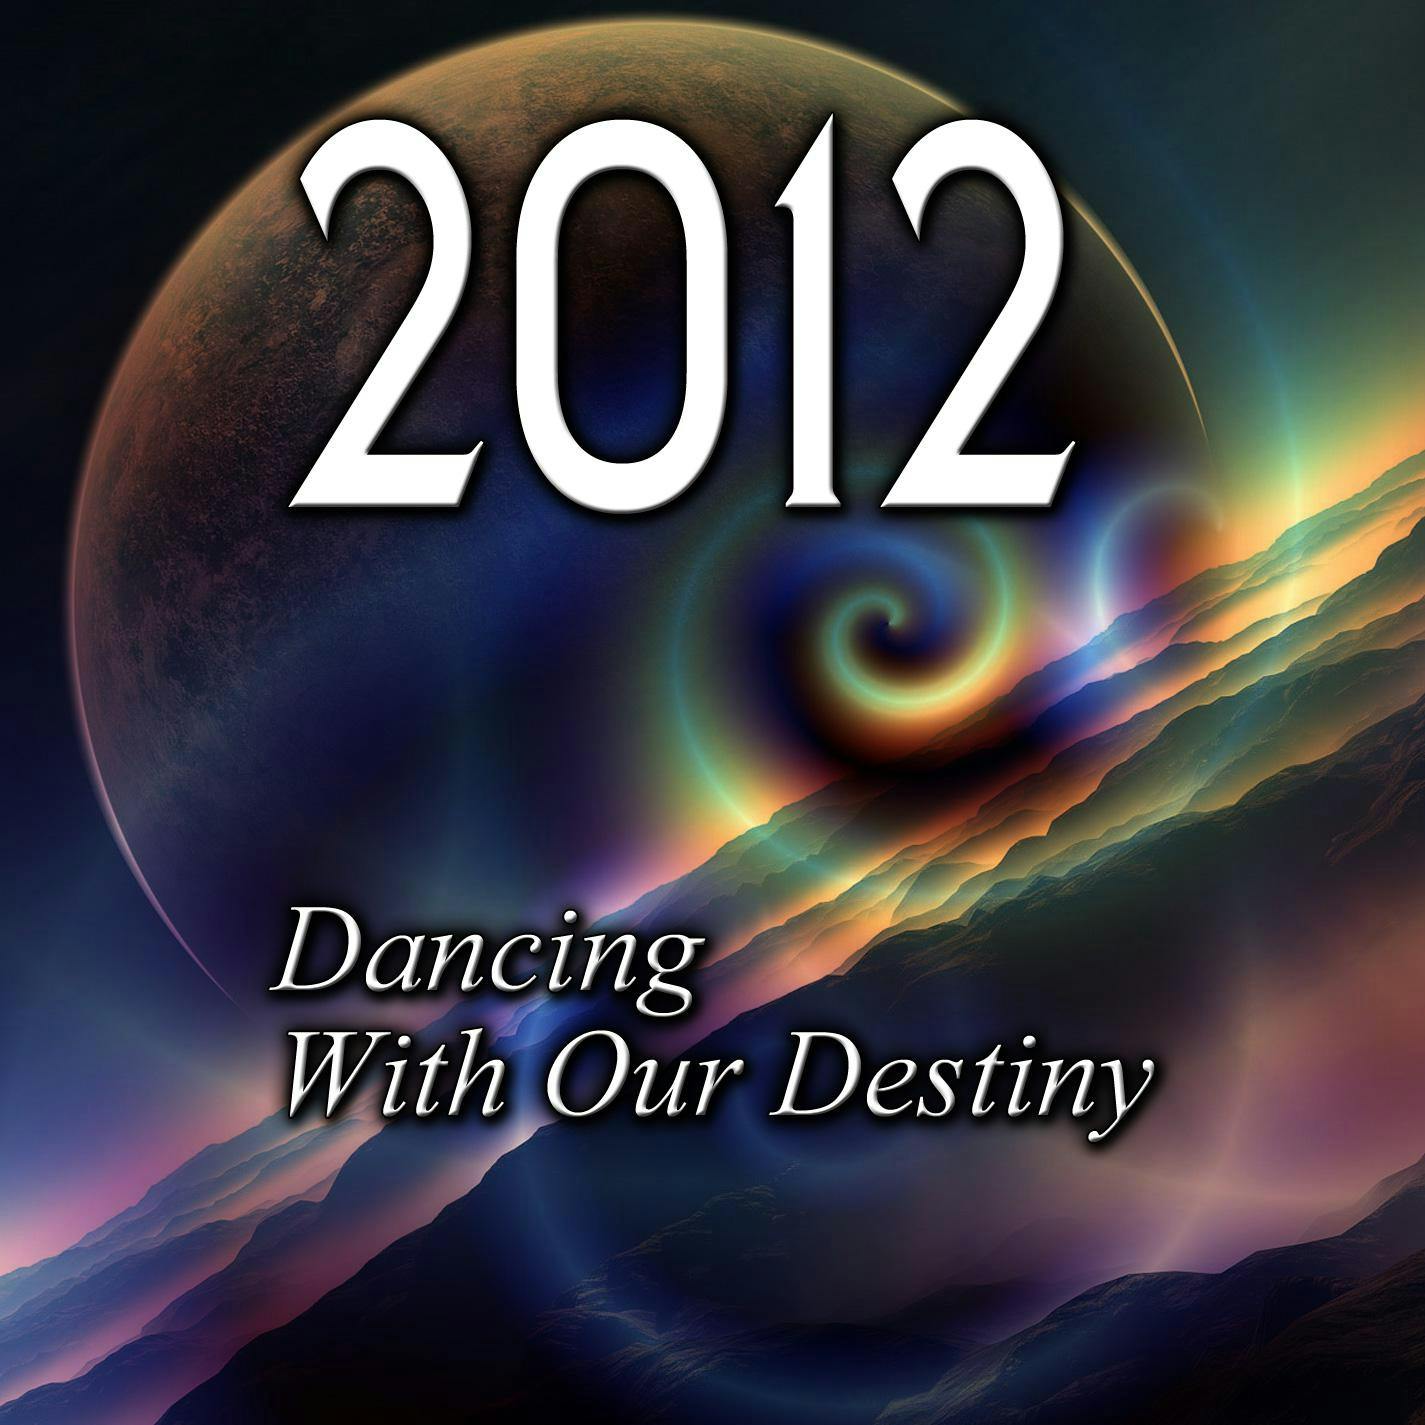 2012: Dancing with Our Destiny - Bruce Weaver